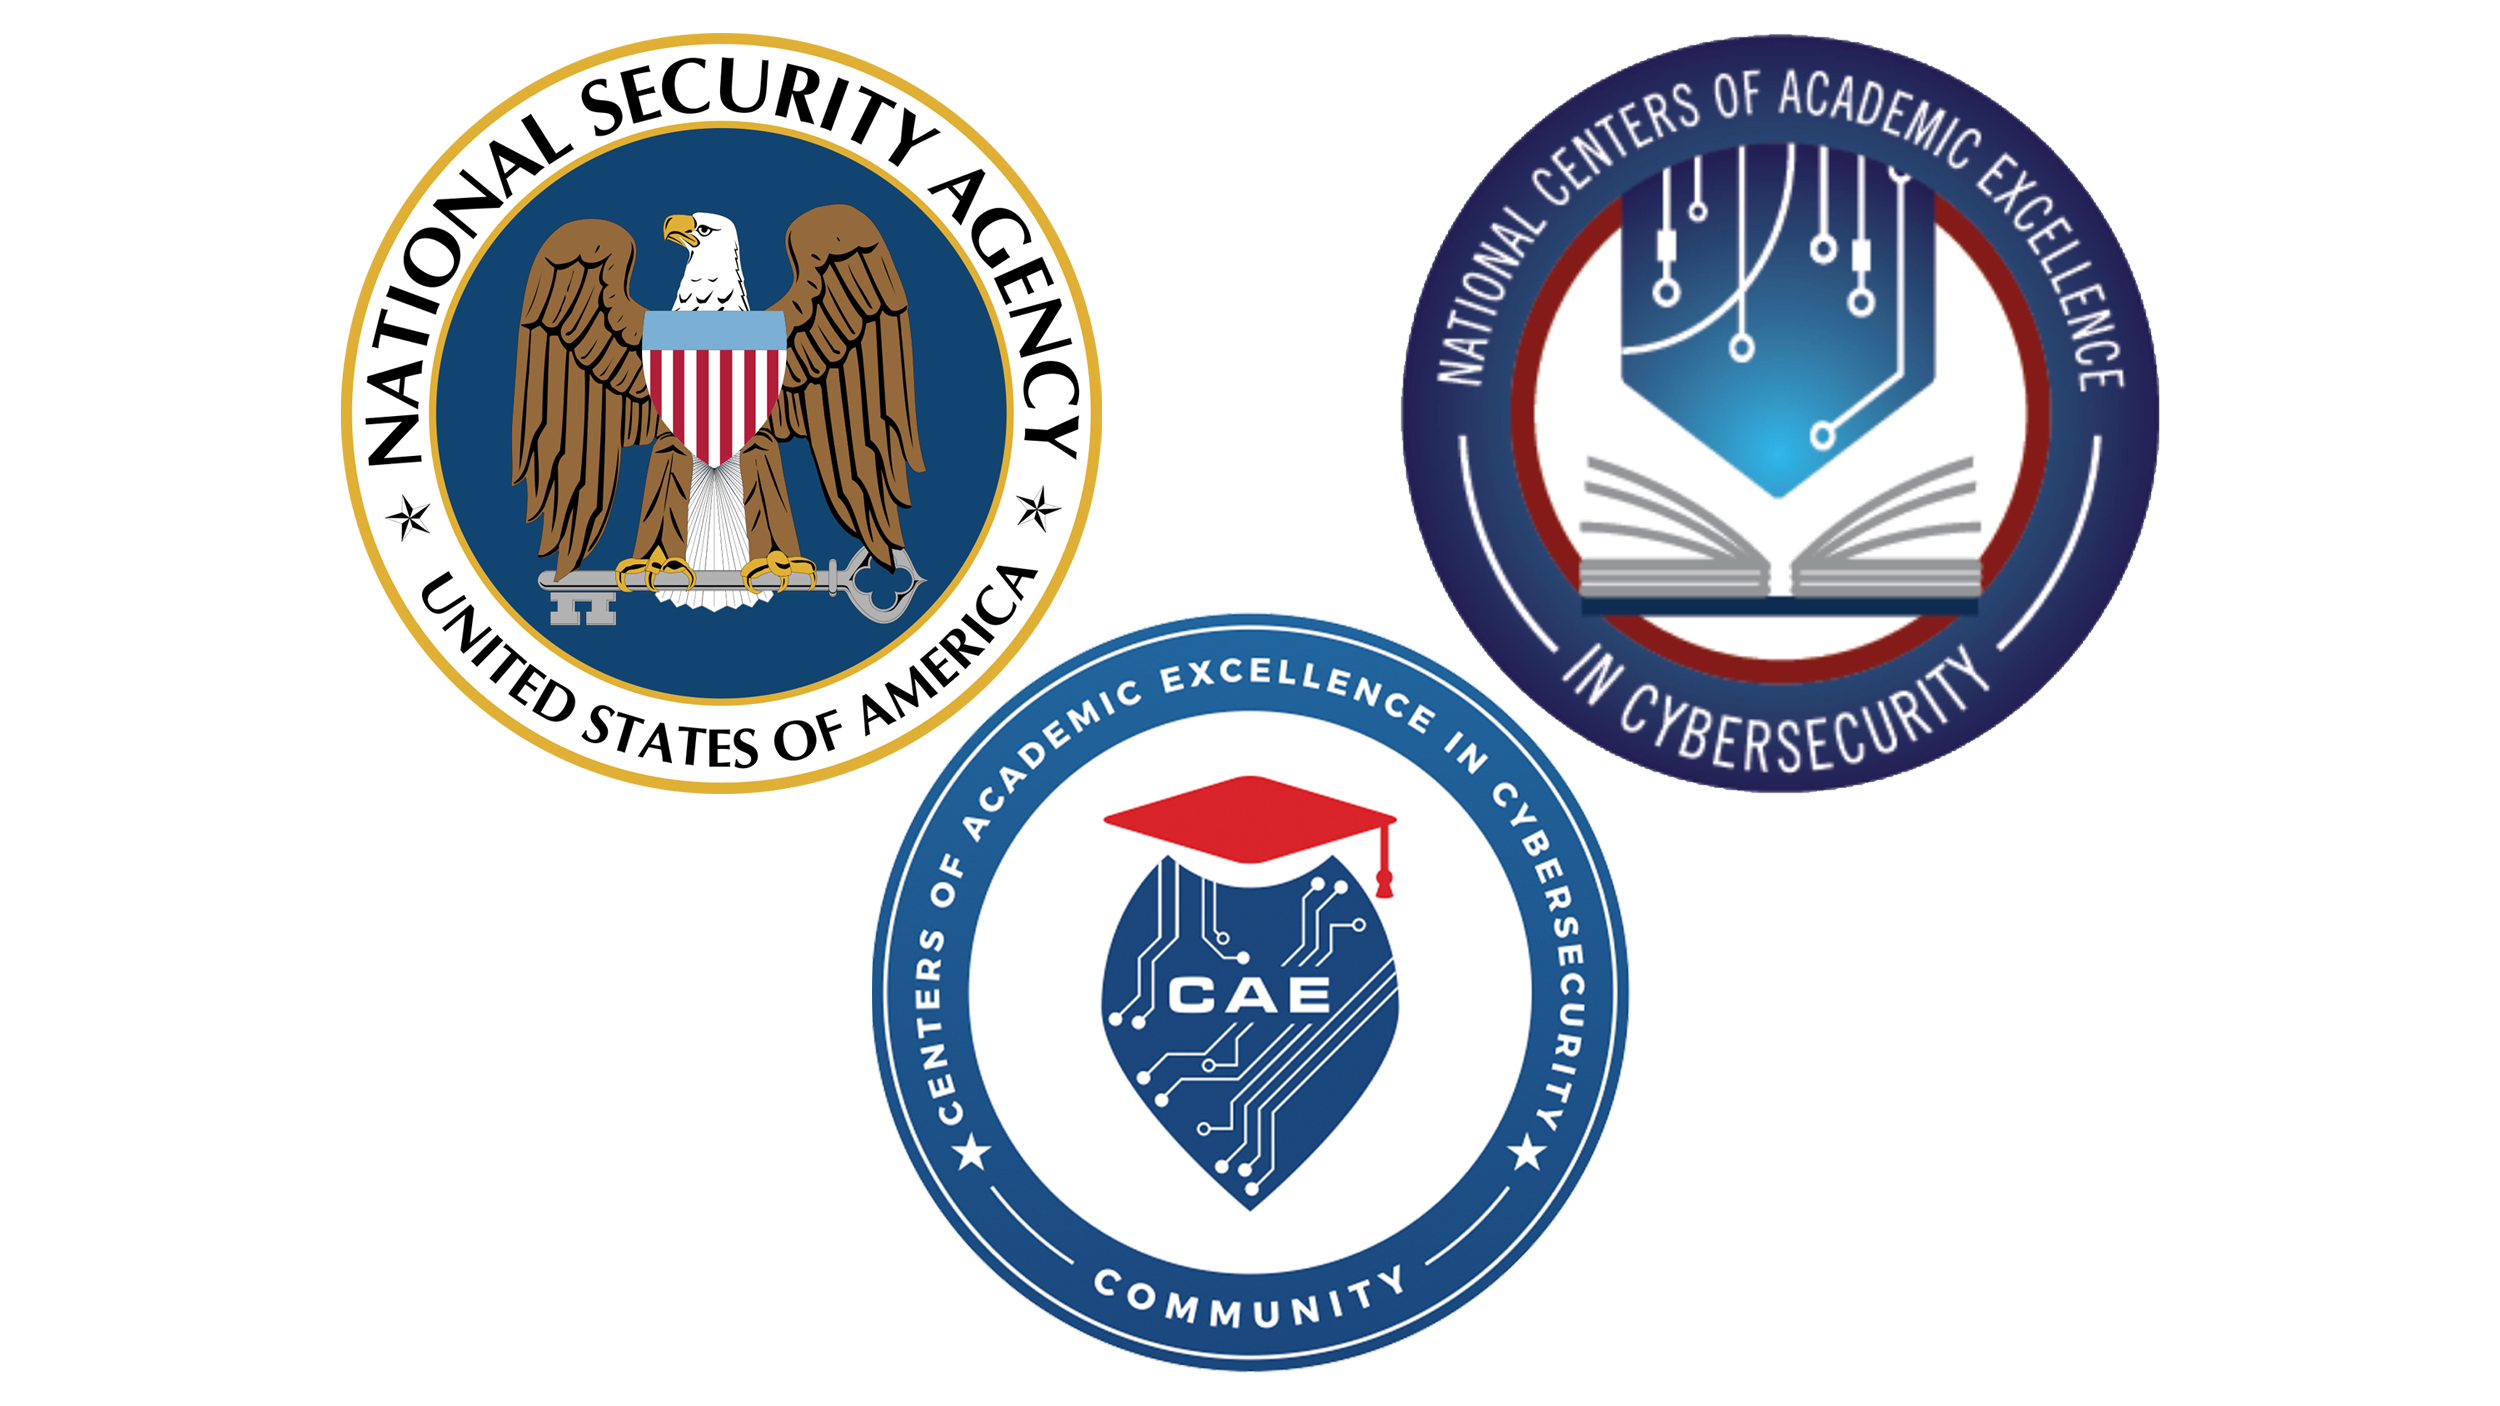 National Security Agency logo and National Center of Academic Excellence logo